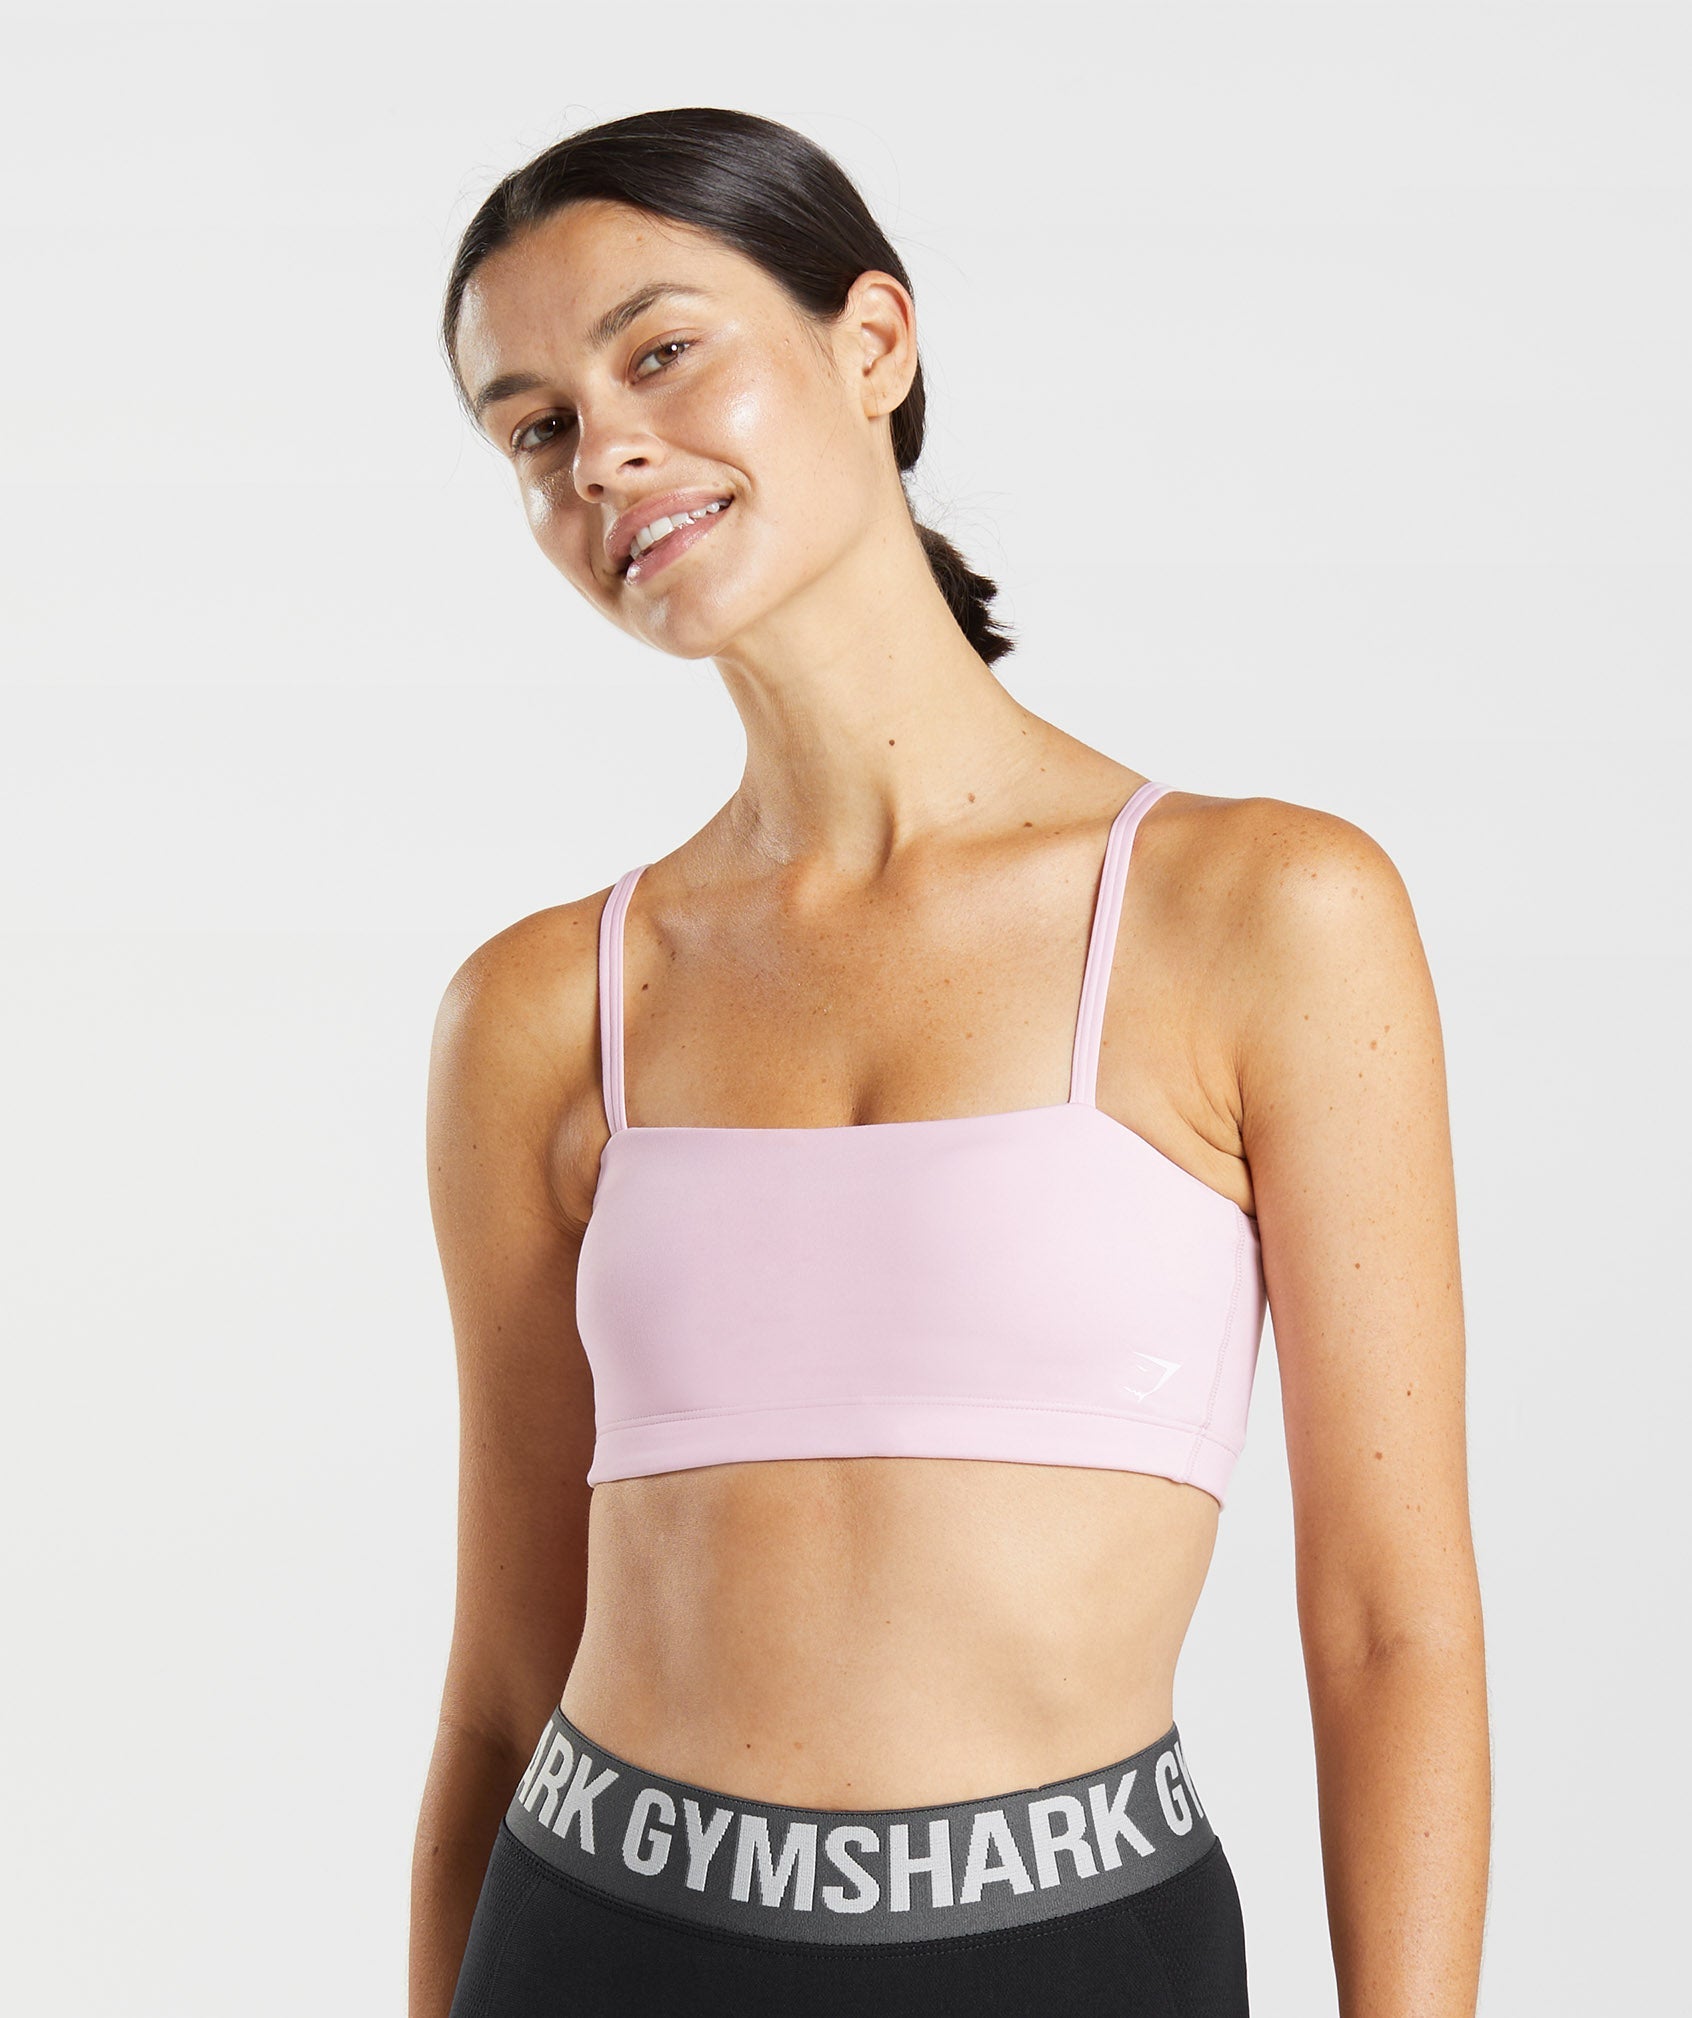 what are the odds that Balance is replicating the Gymshark bandeau